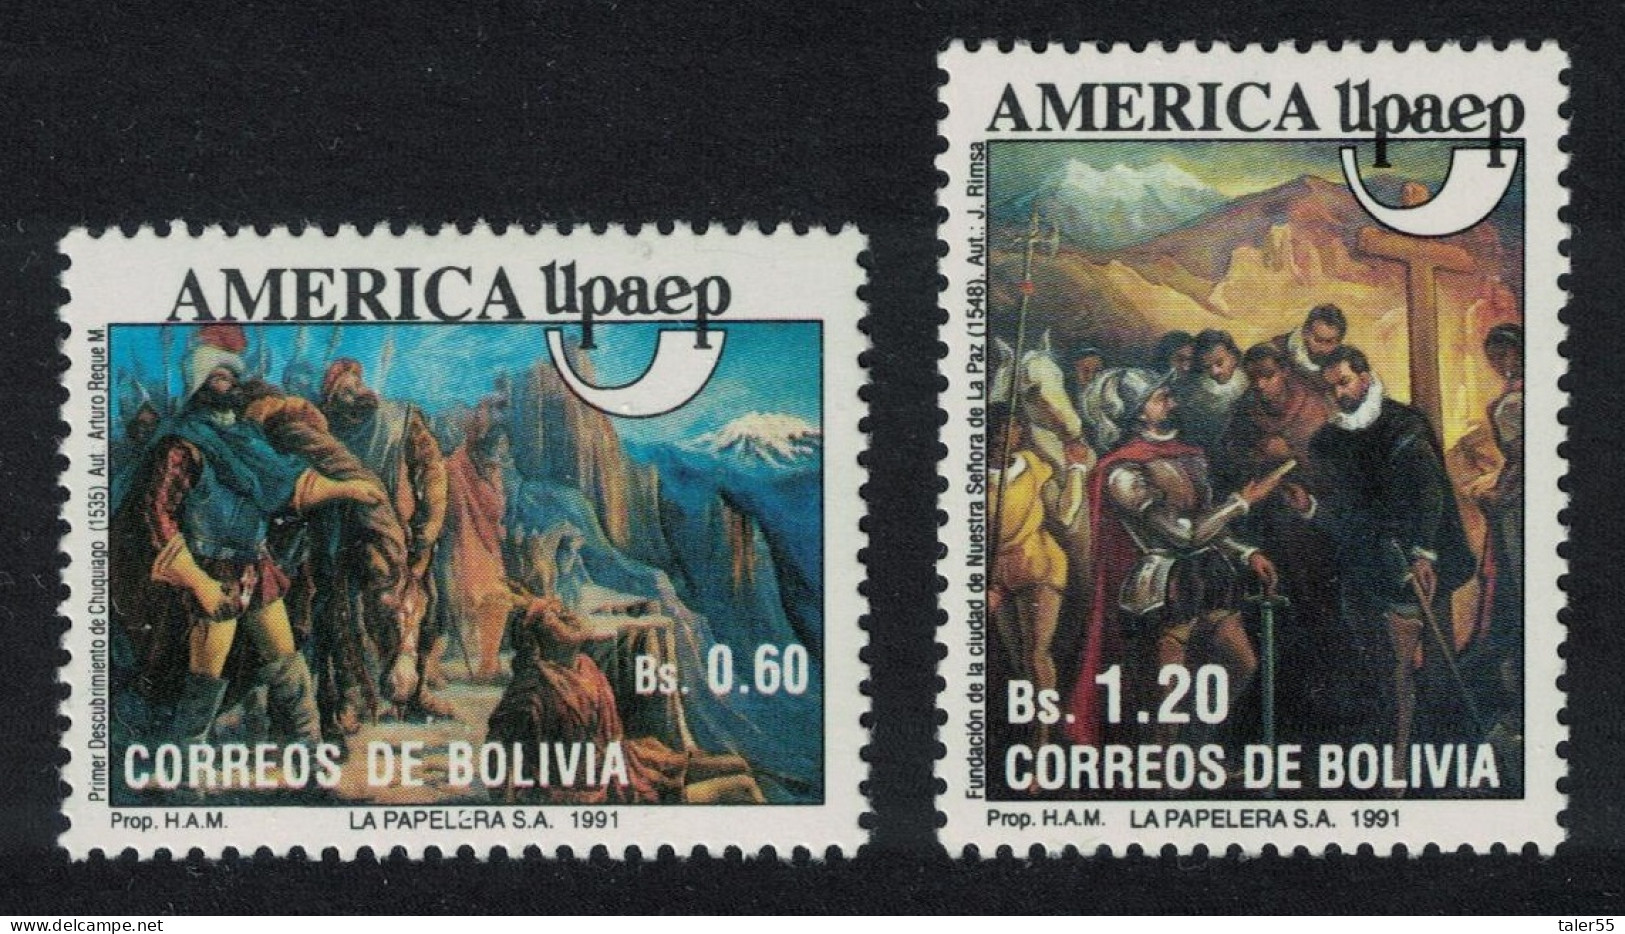 Bolivia America Voyages Of Discovery Paintings UPAEP 2v 1991 MNH SG#1232-1233 - Bolivie